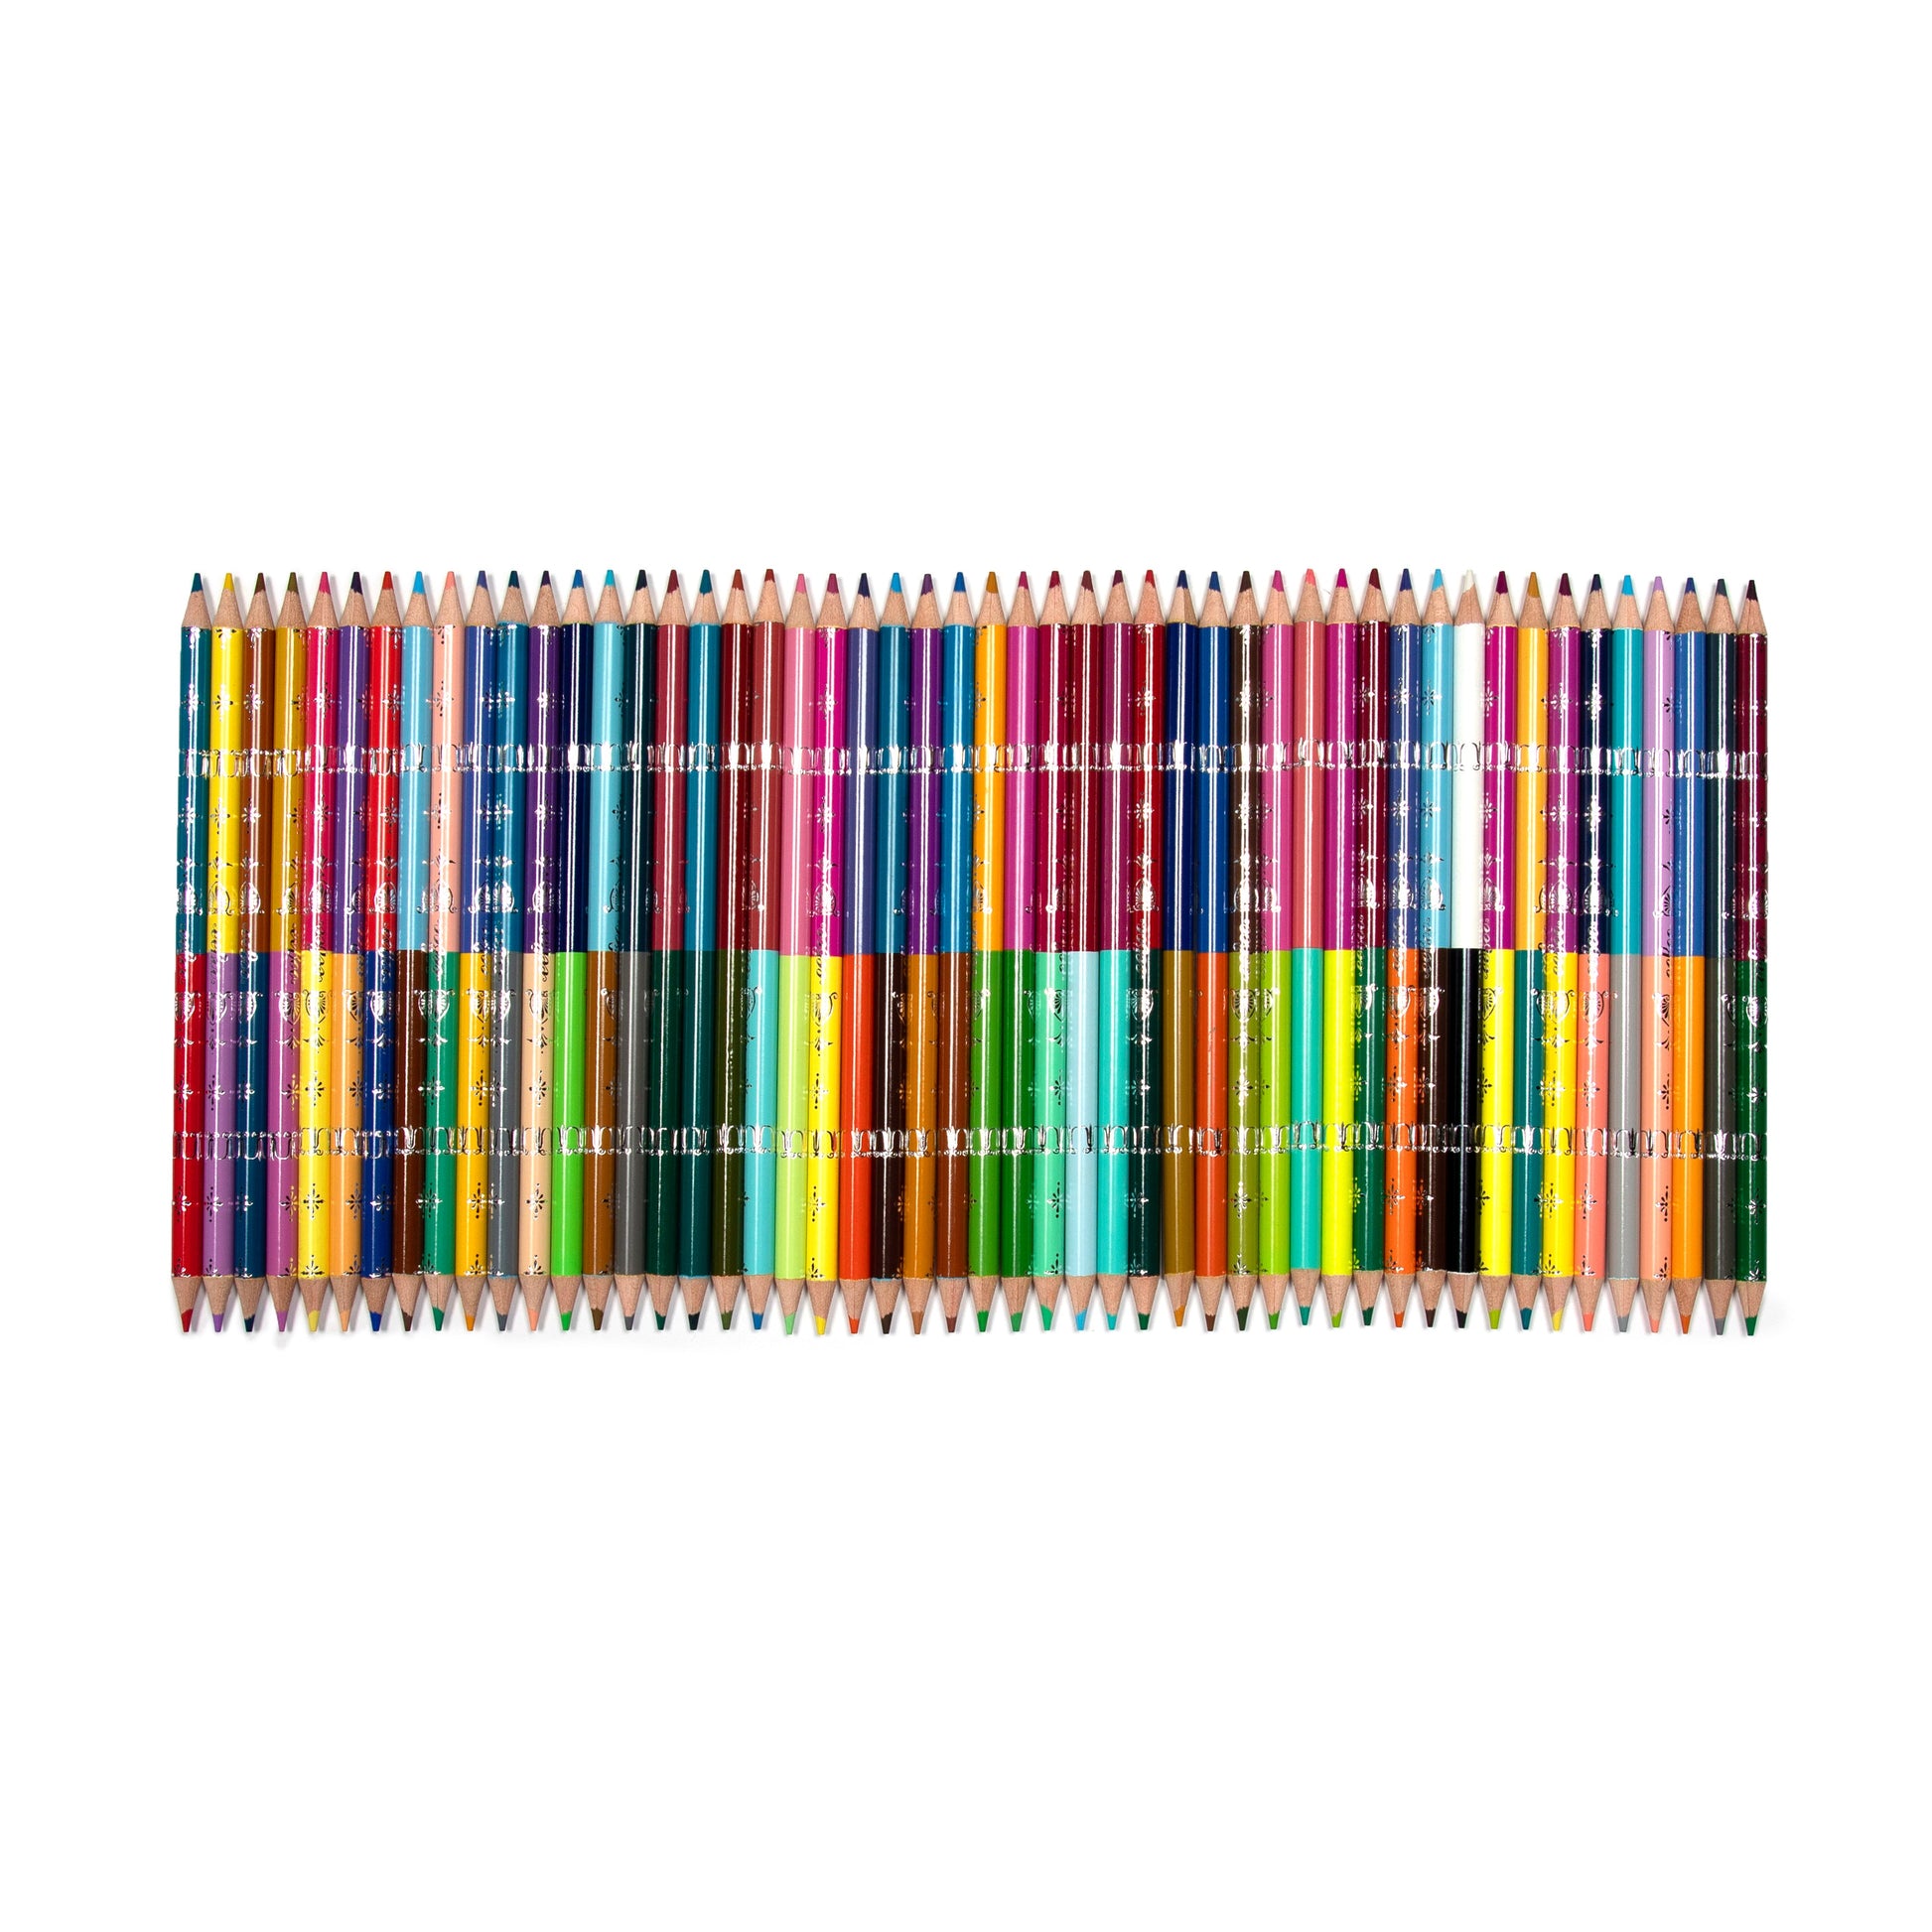 100 Colors 50 Double-Sided Color Pencils | Fun Unique Gifts for Kids & Adults